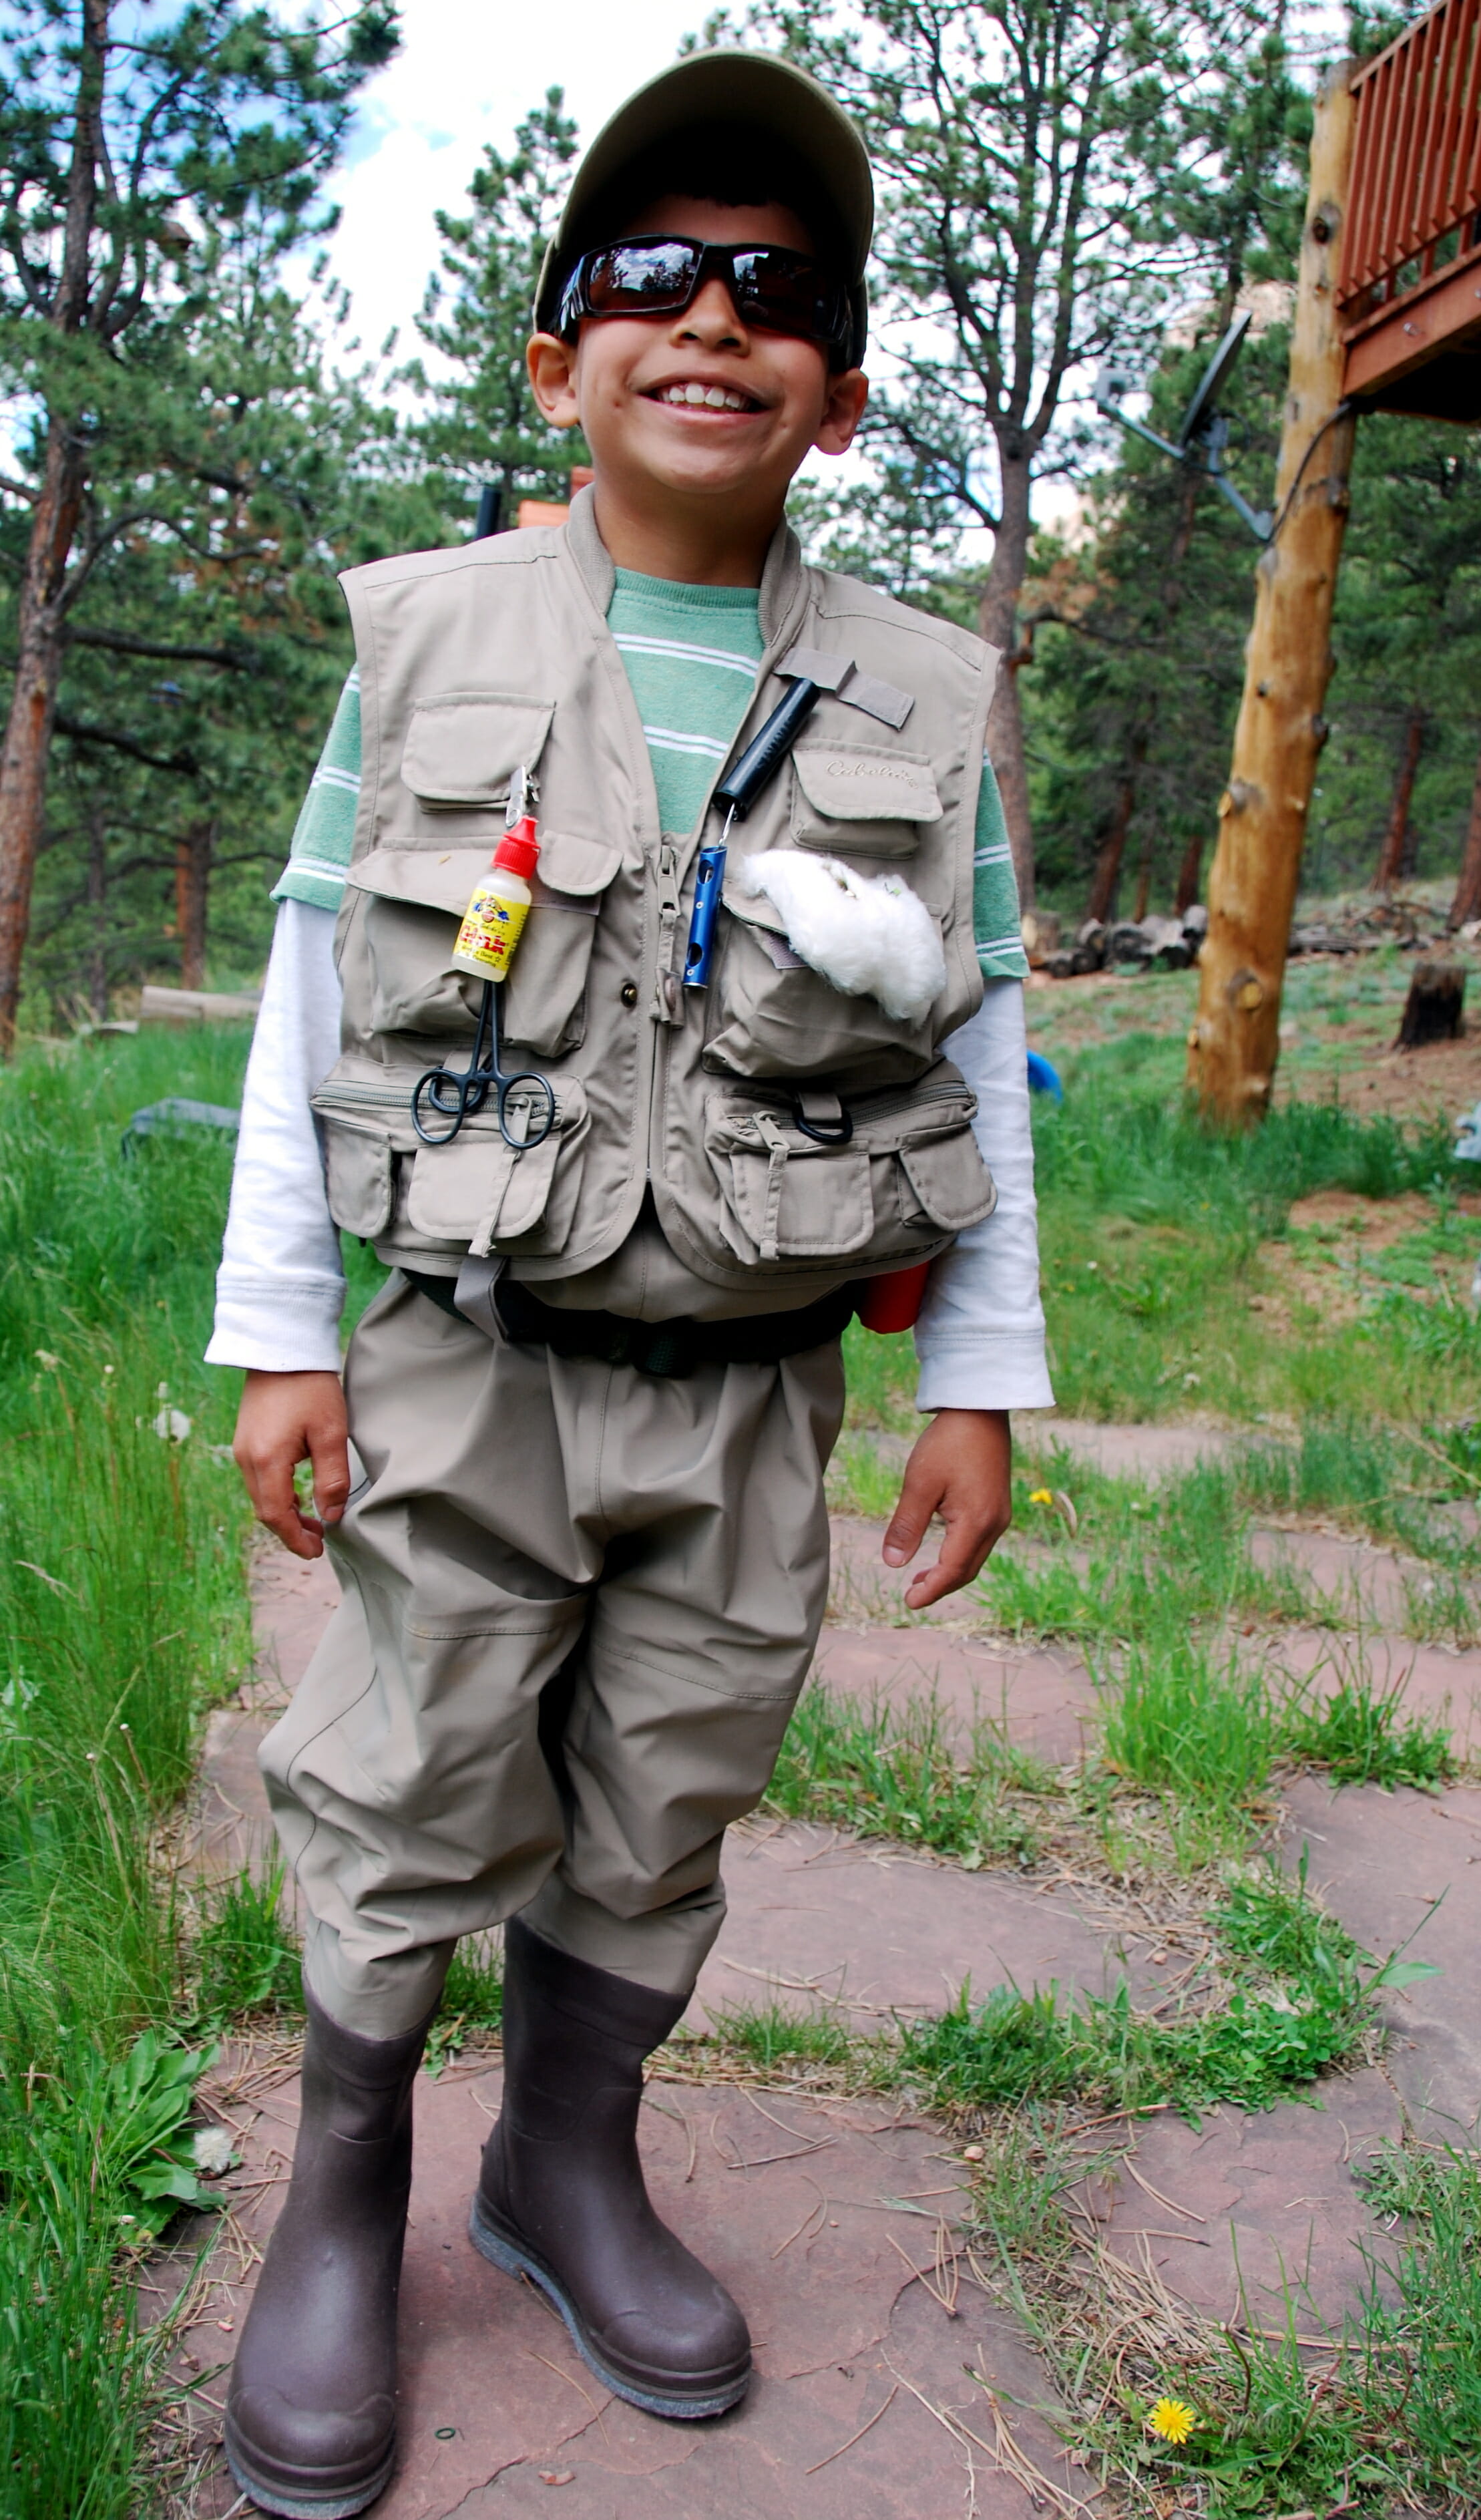 Teaching Kids To Fly Fish: The Five Golden Rules - Trout Unlimited